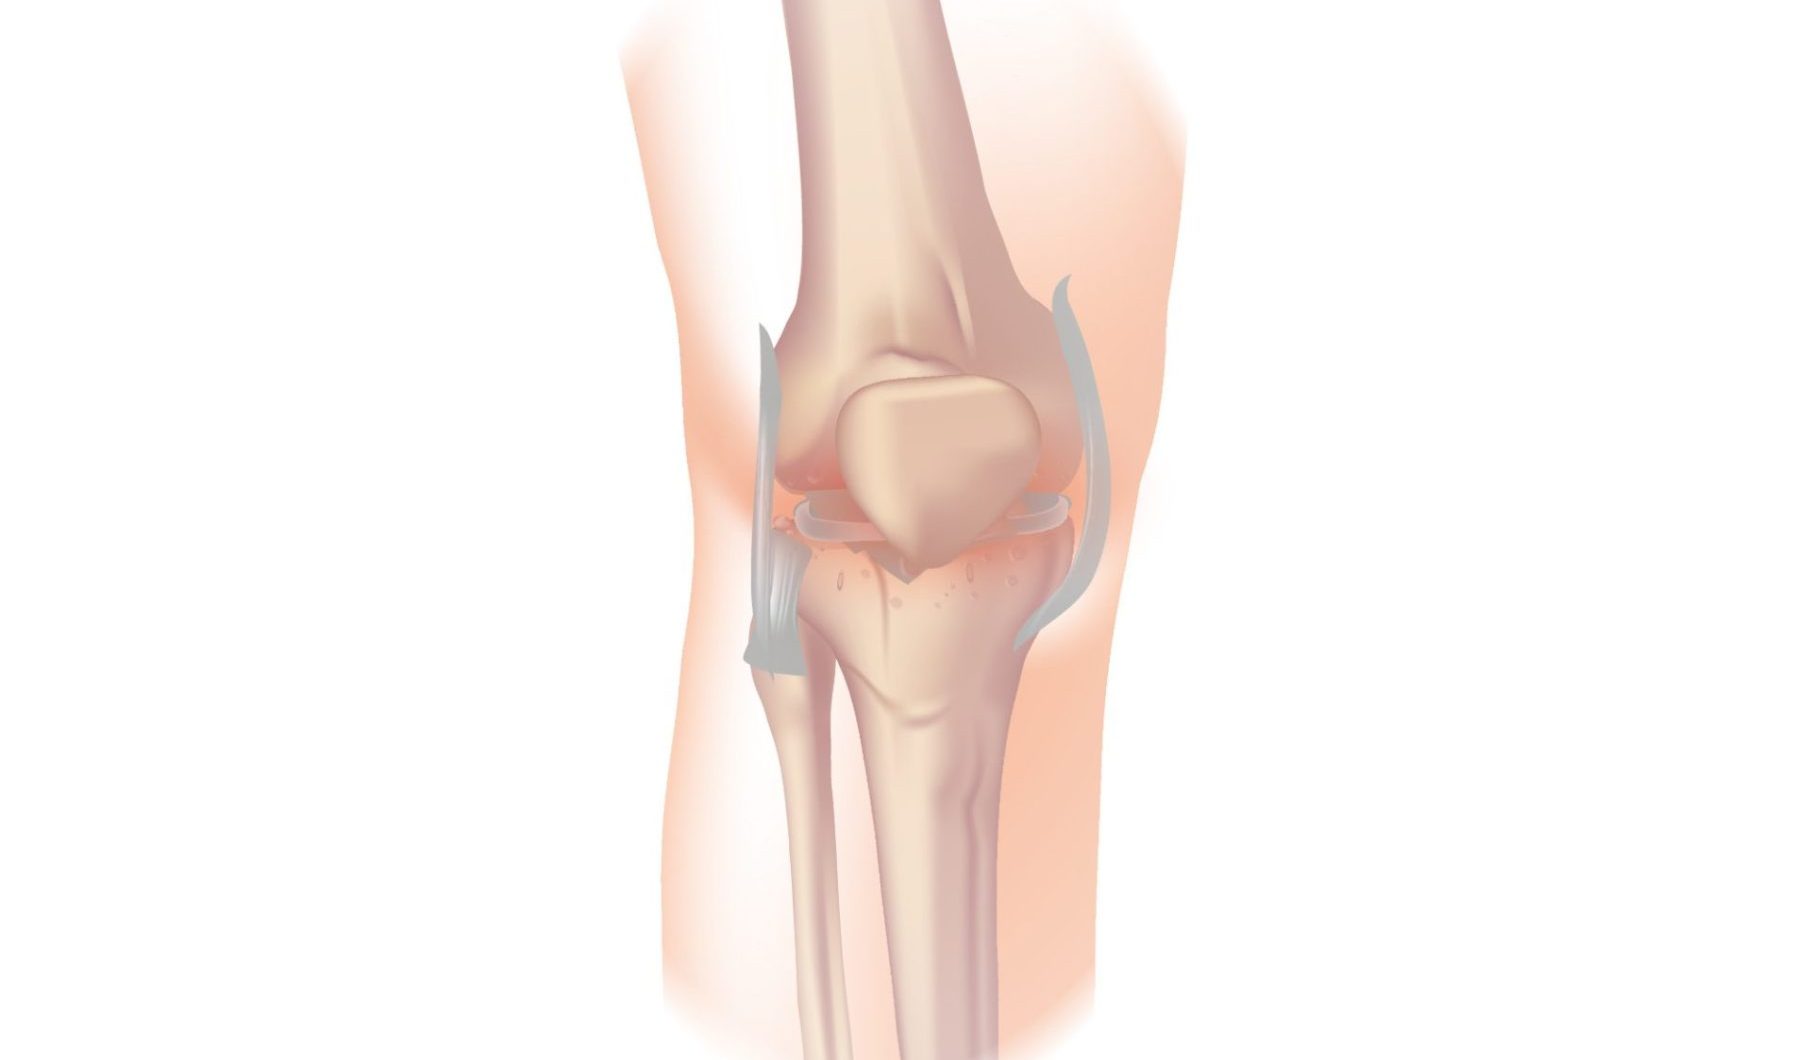 Posterior Cruciate Ligament (PCL) injury